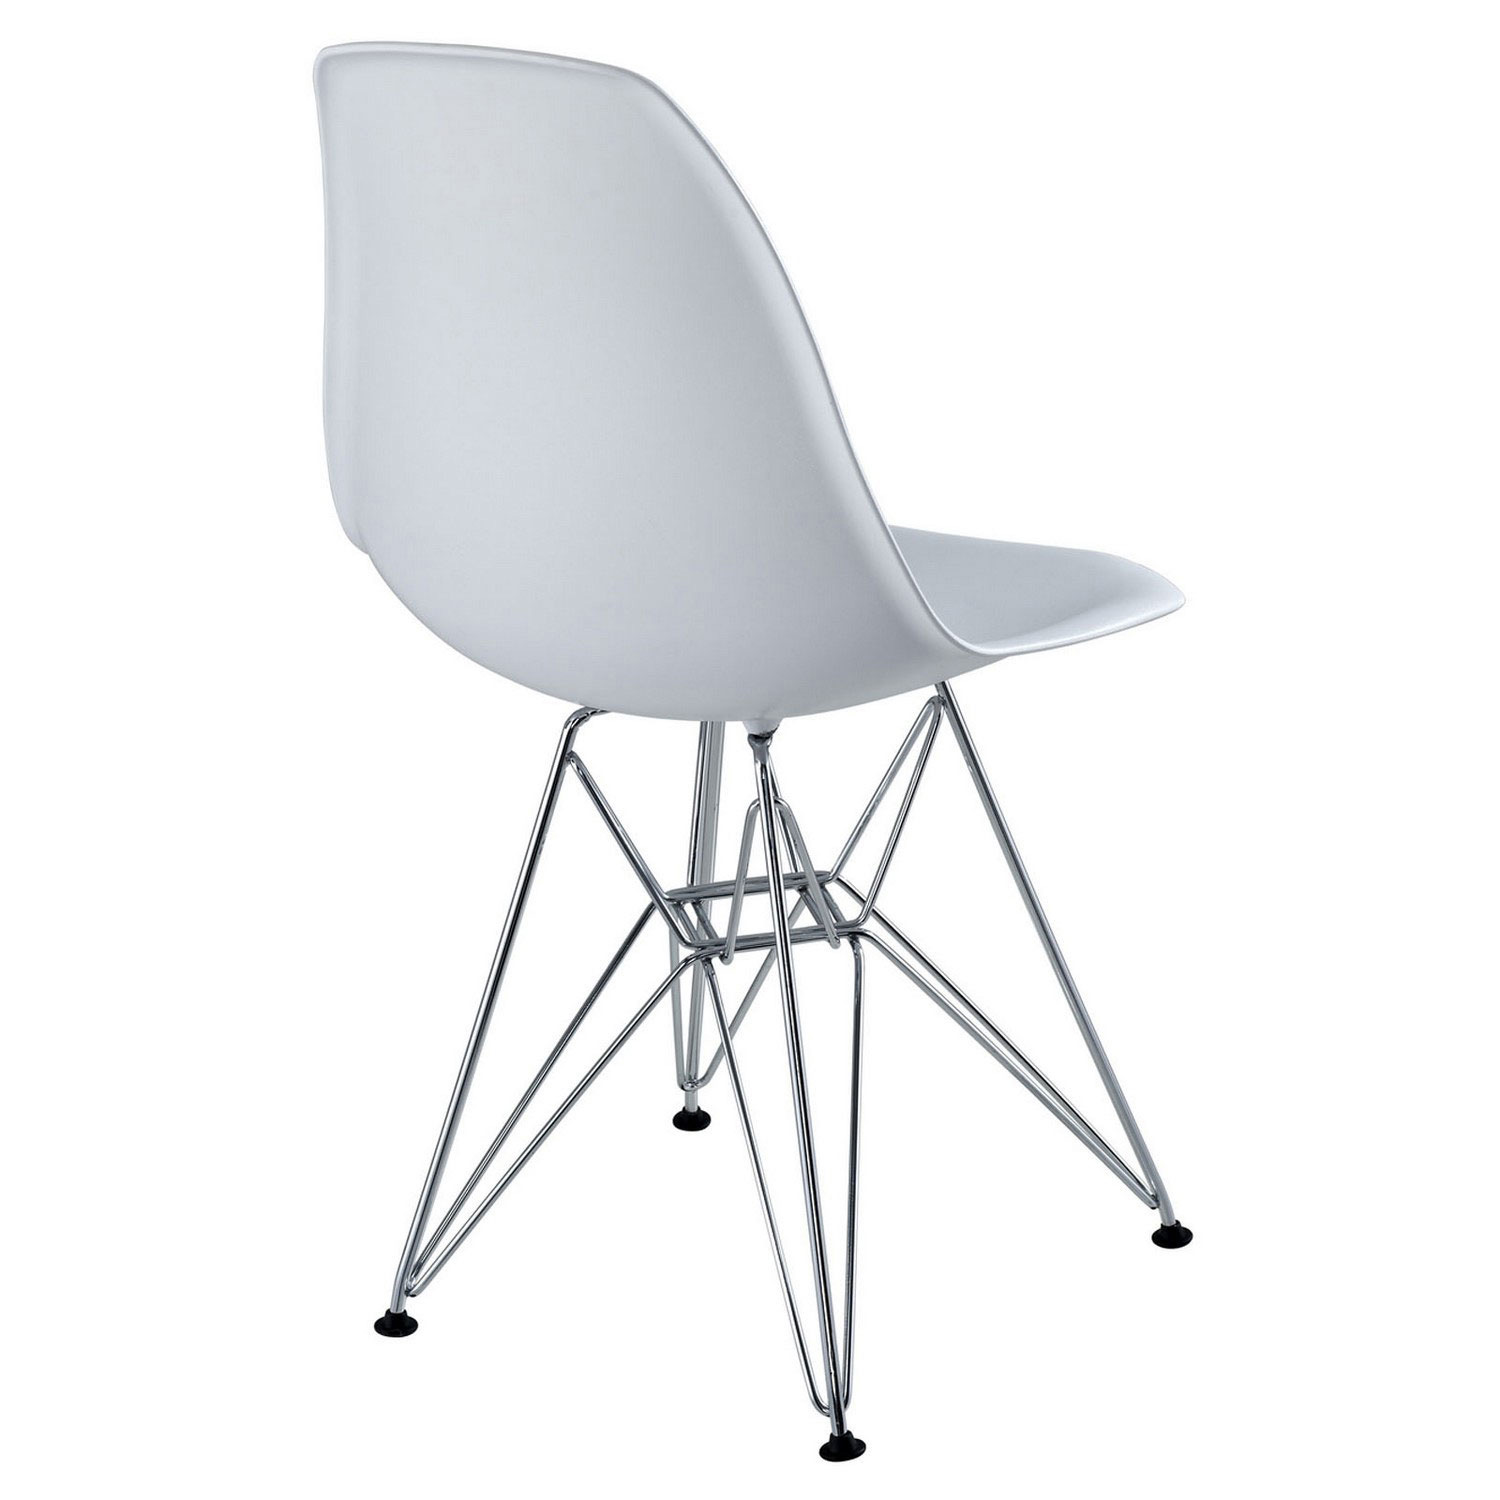 Modway Paris Dining Side Chair - White